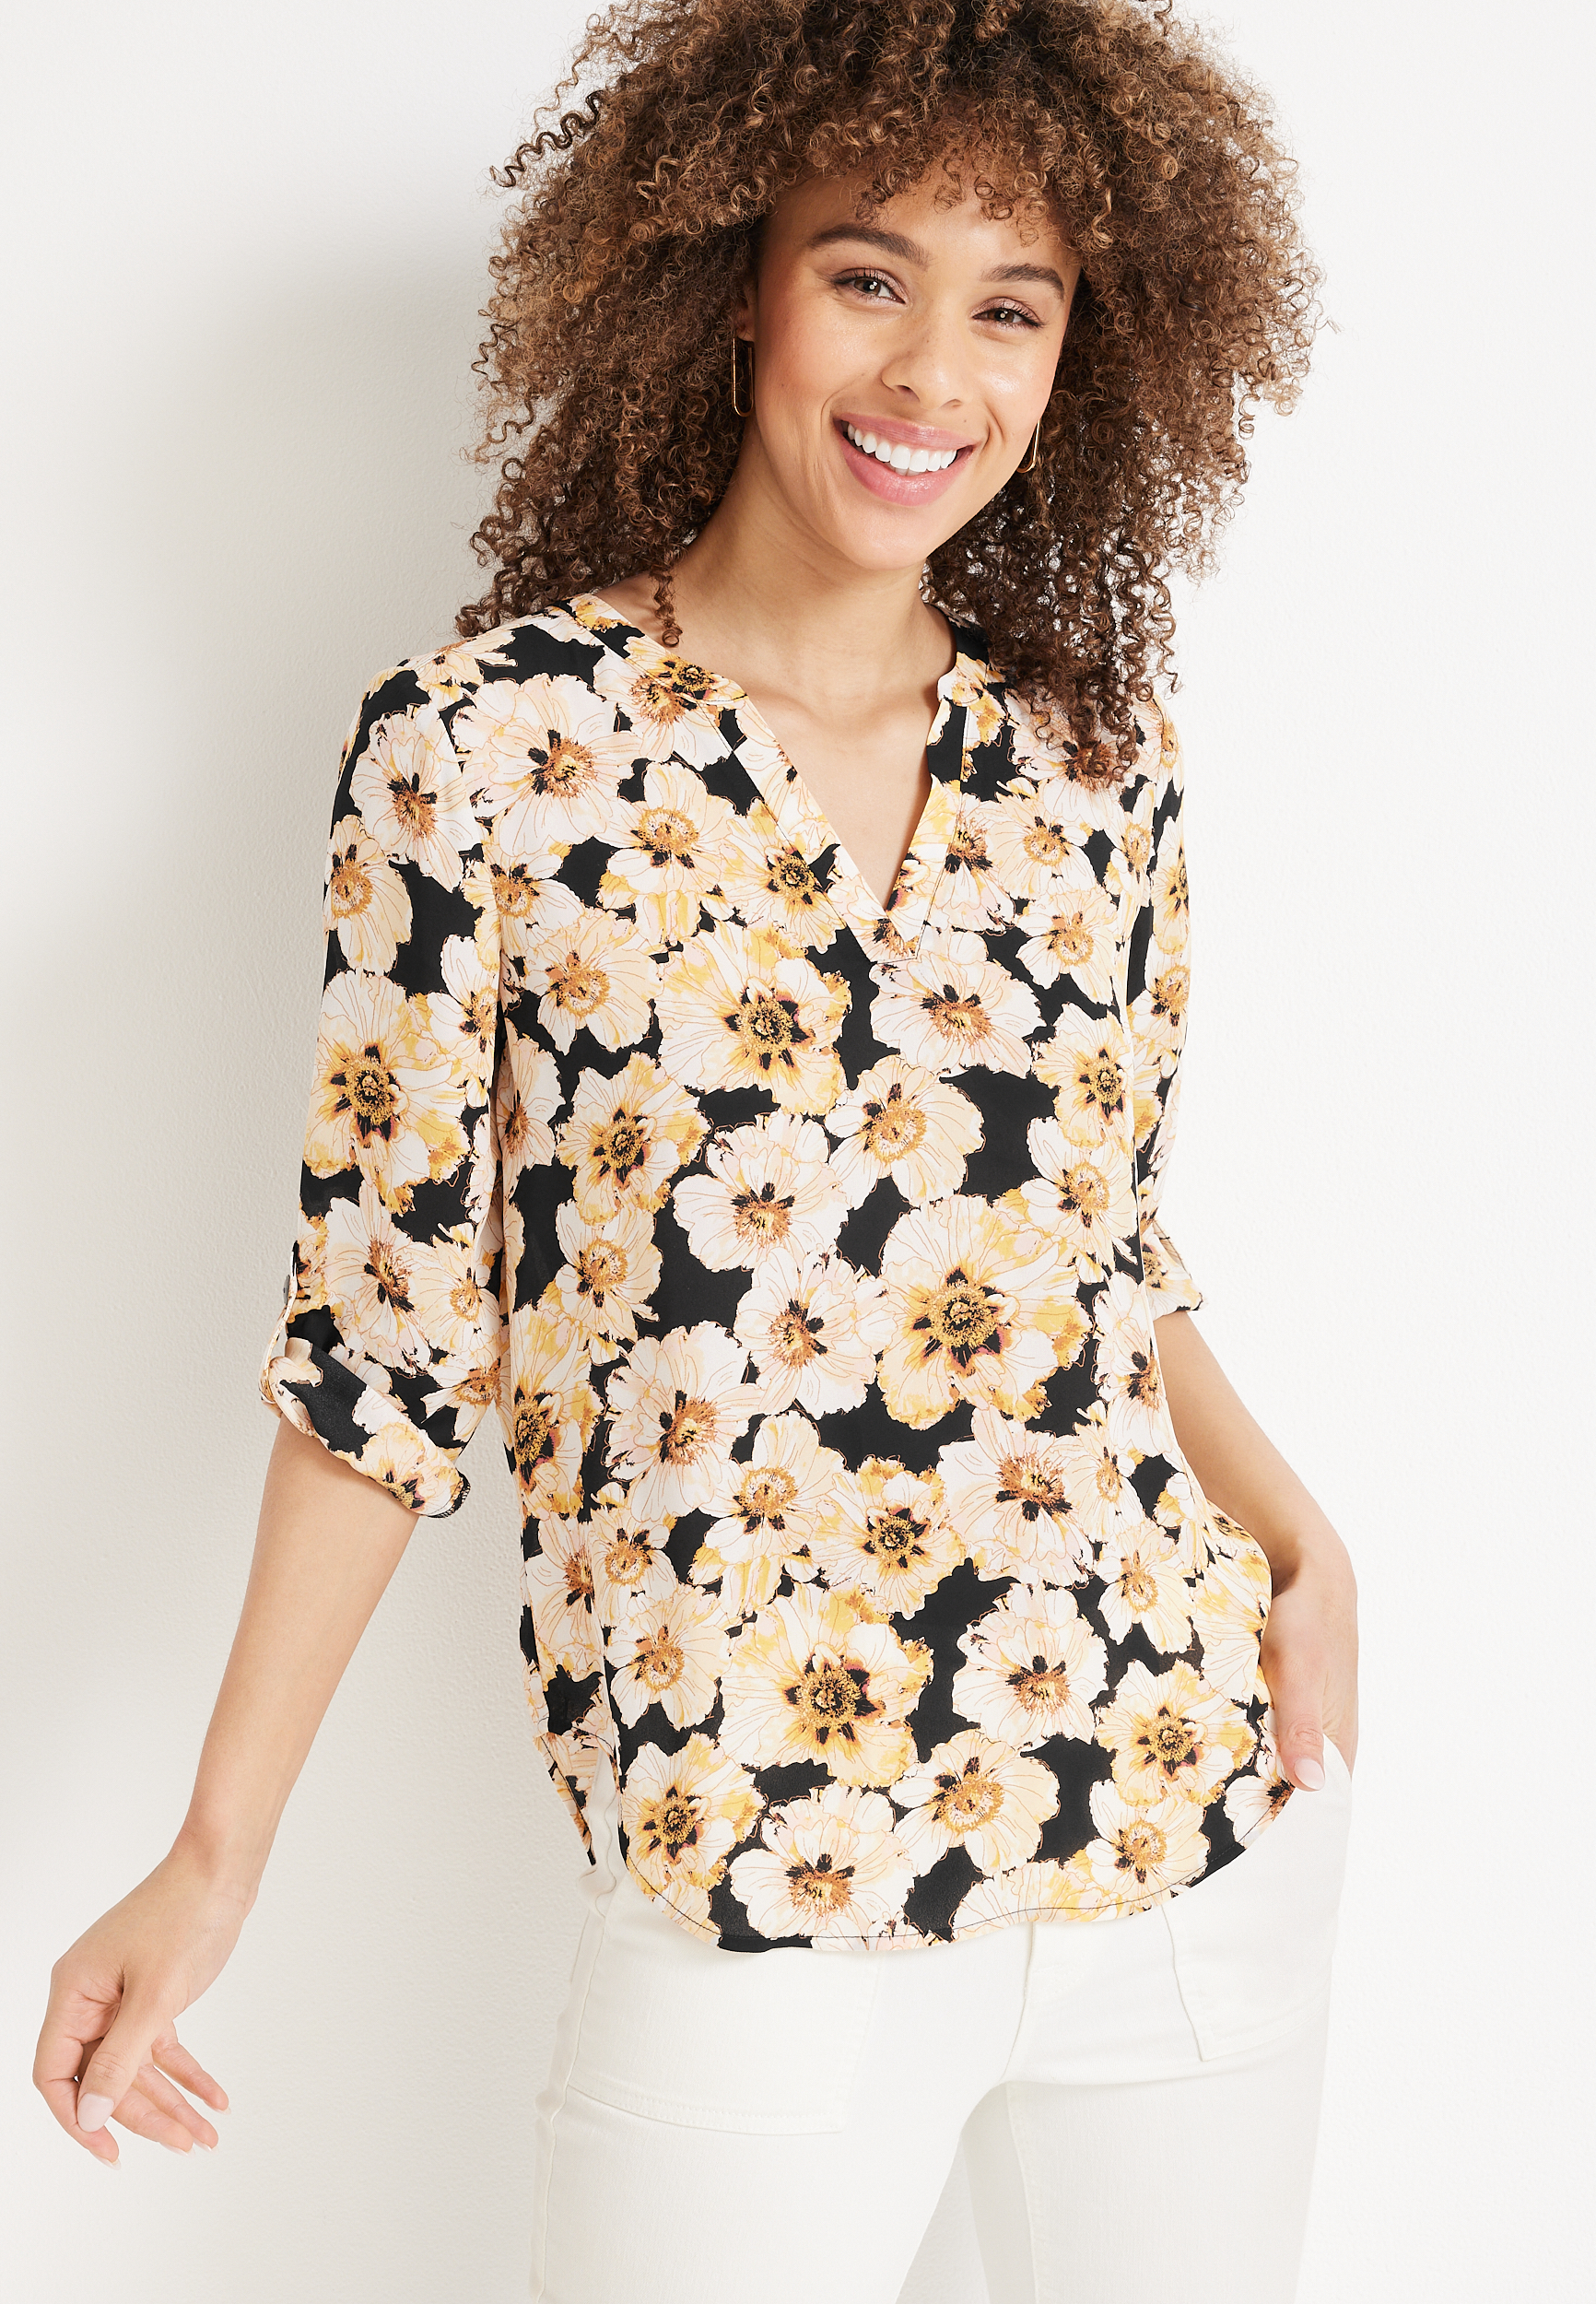 Atwood Floral 3/4 Sleeve Popover Blouse | maurices